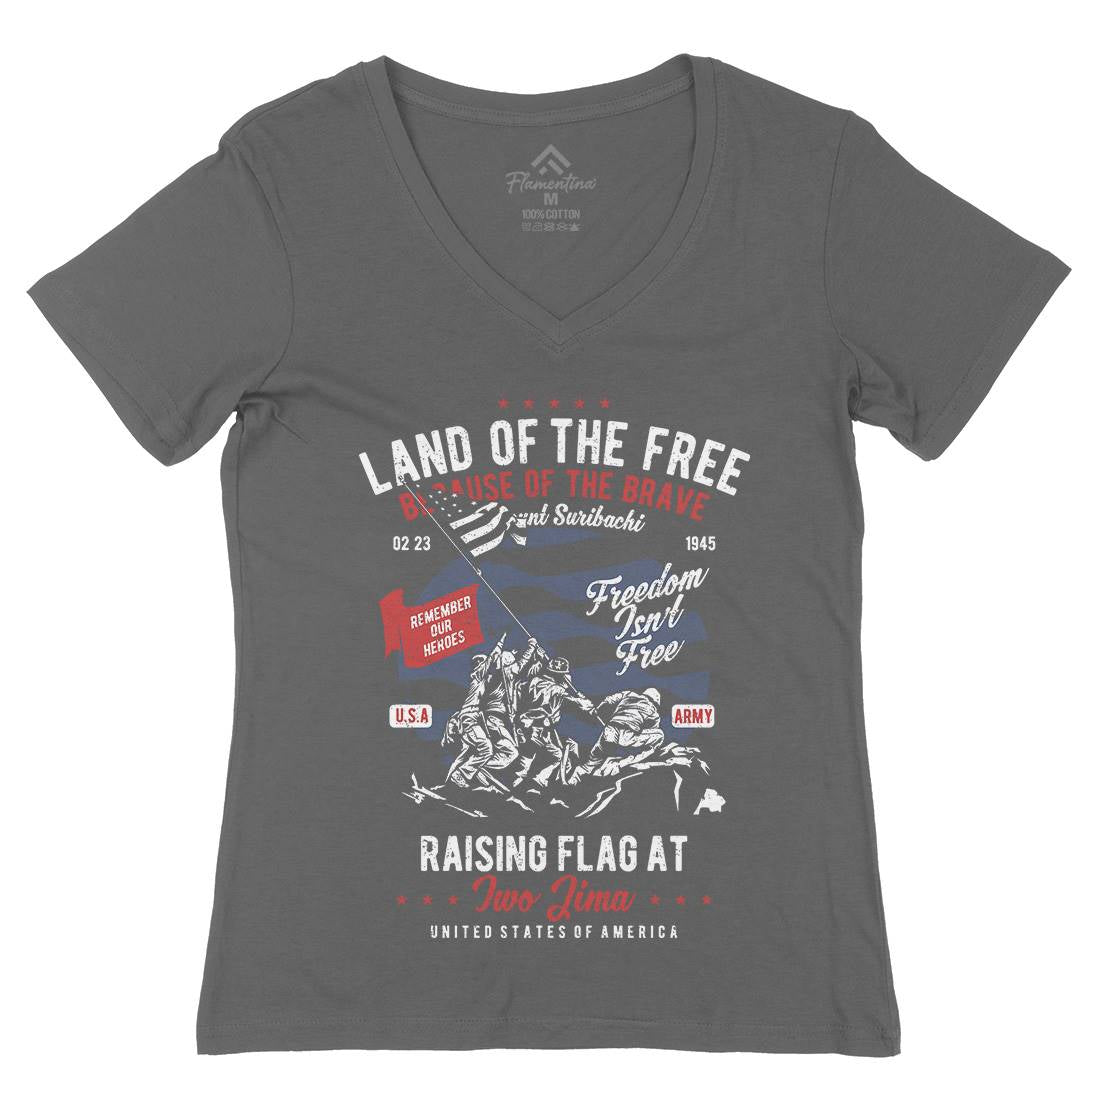 Land Of The Free Womens Organic V-Neck T-Shirt Army A702